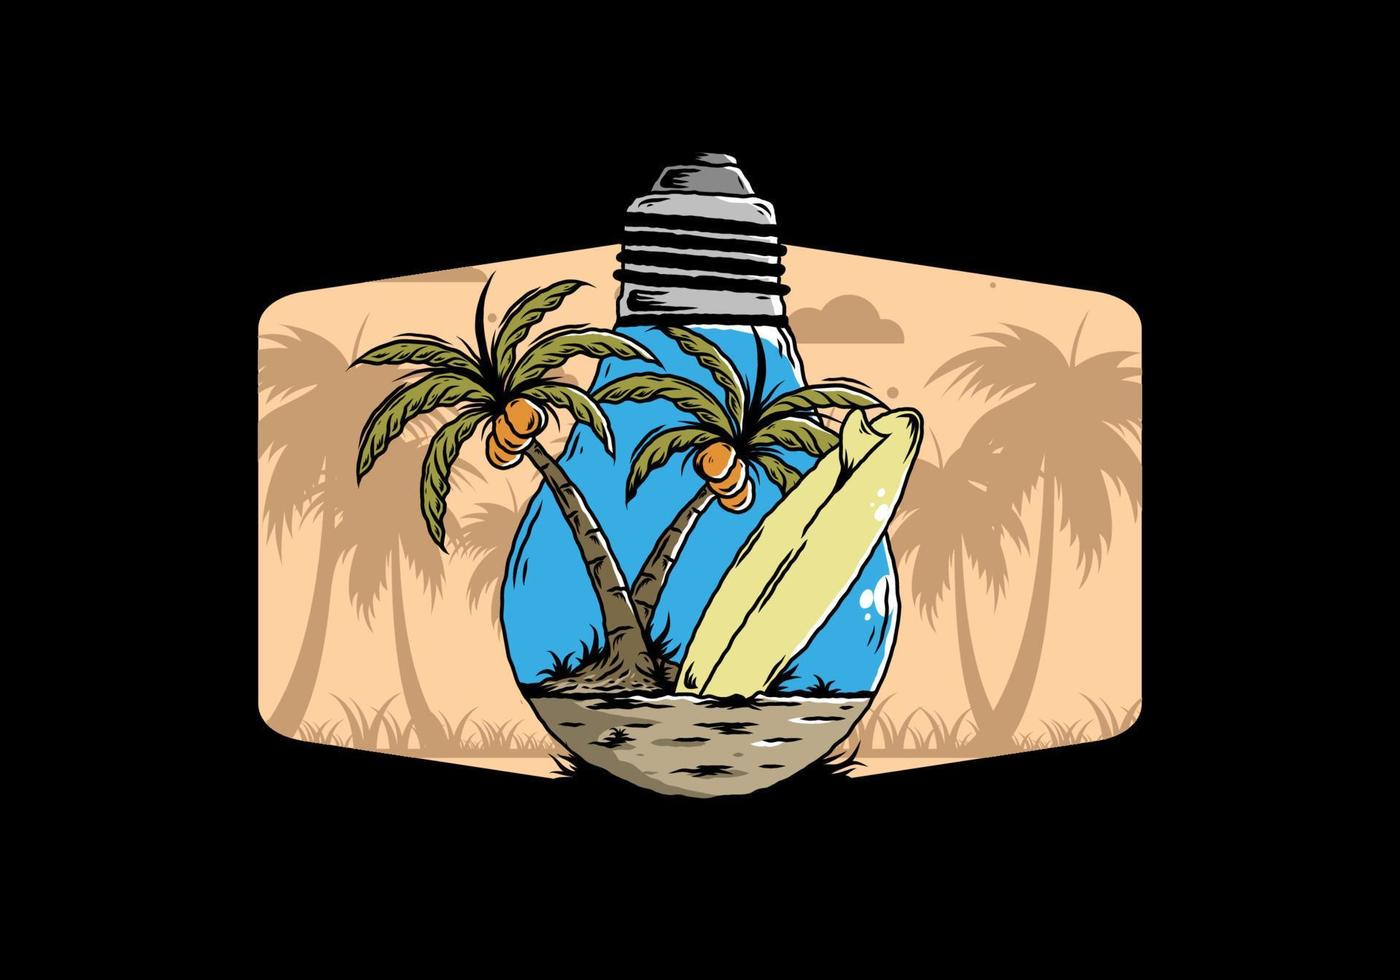 Coconut tree and surfing board in a bulb lamp illustration vector